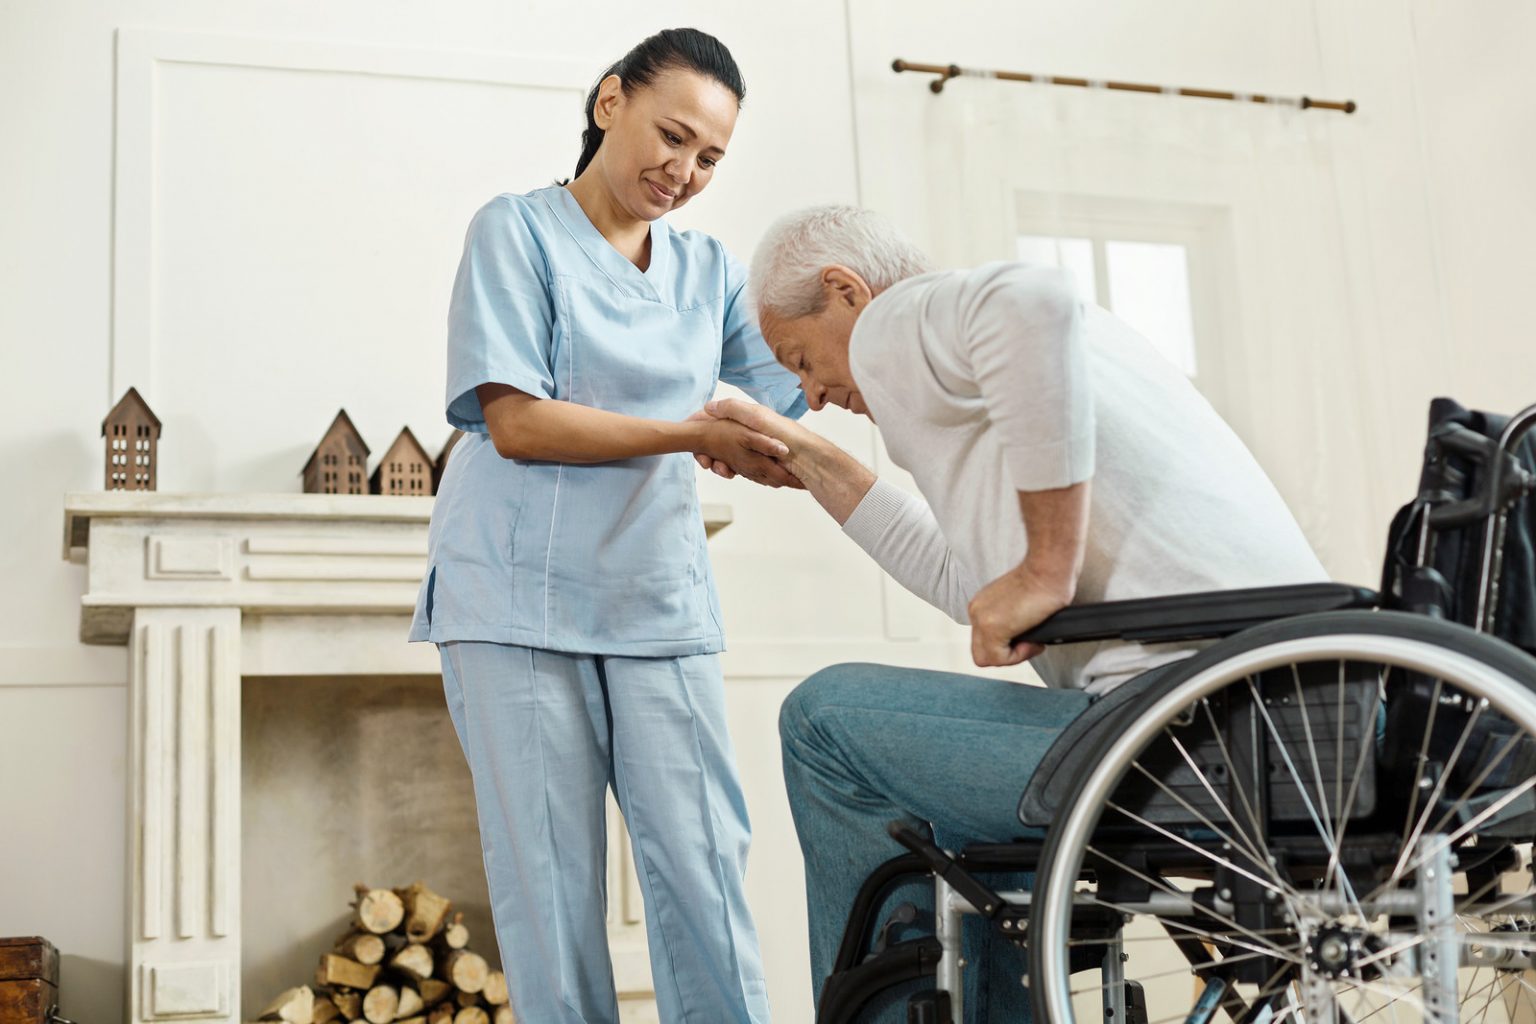 importance-of-cna-classes-in-improving-long-term-patient-health-care